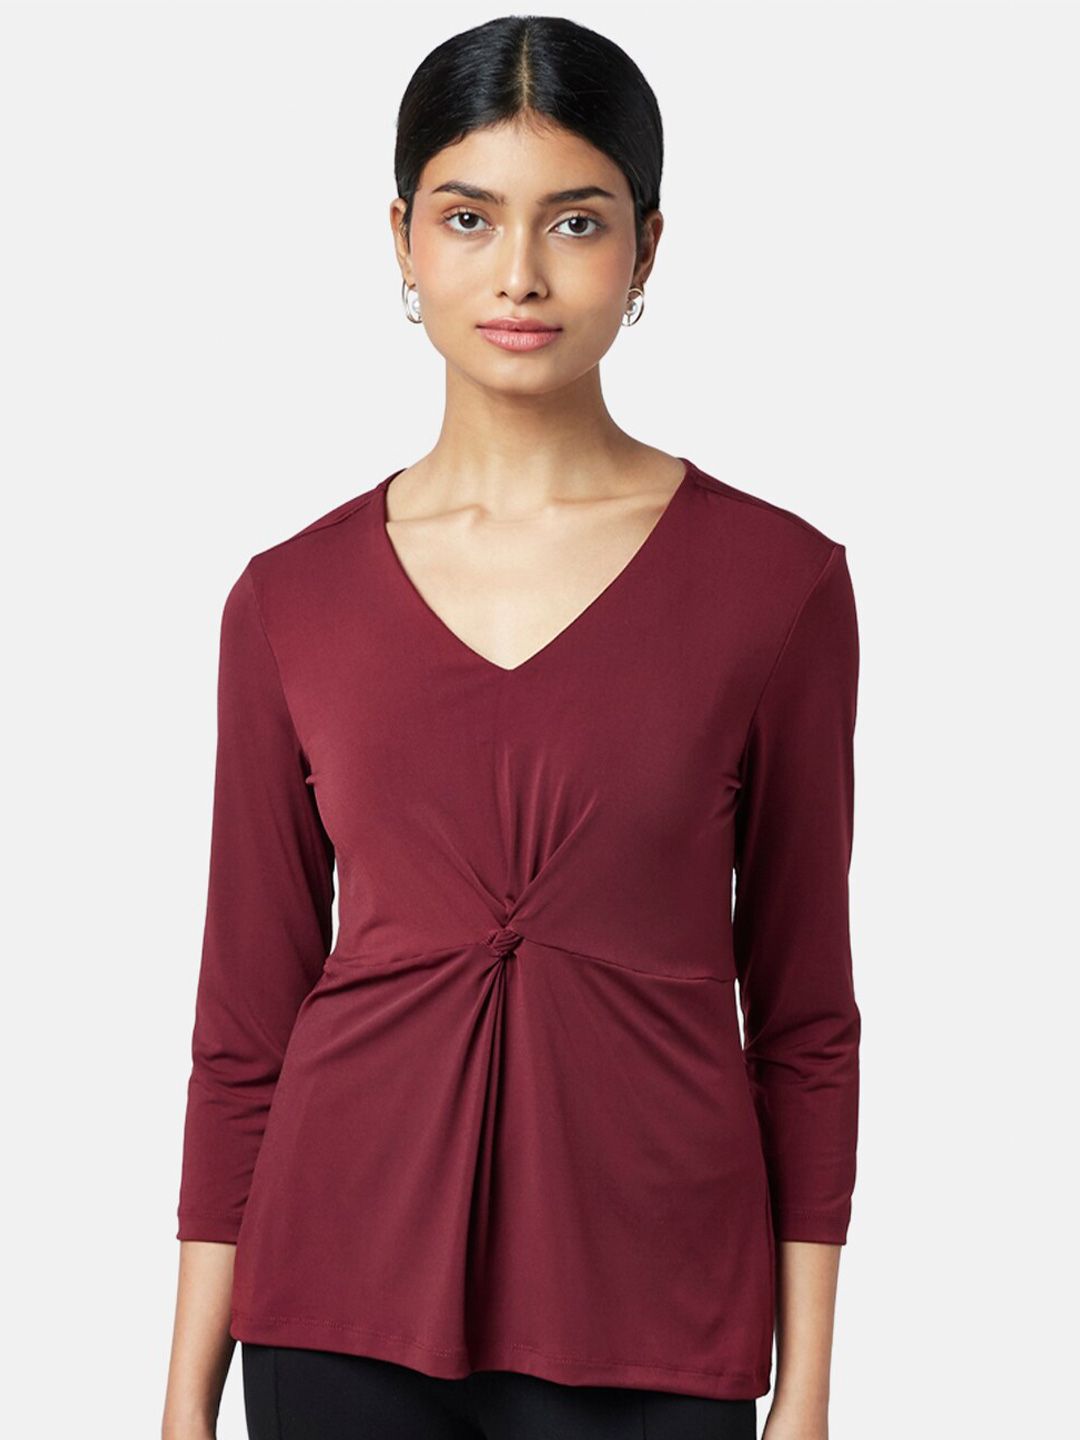 Annabelle by Pantaloons Women Burgundy Solid Twisted Top Price in India